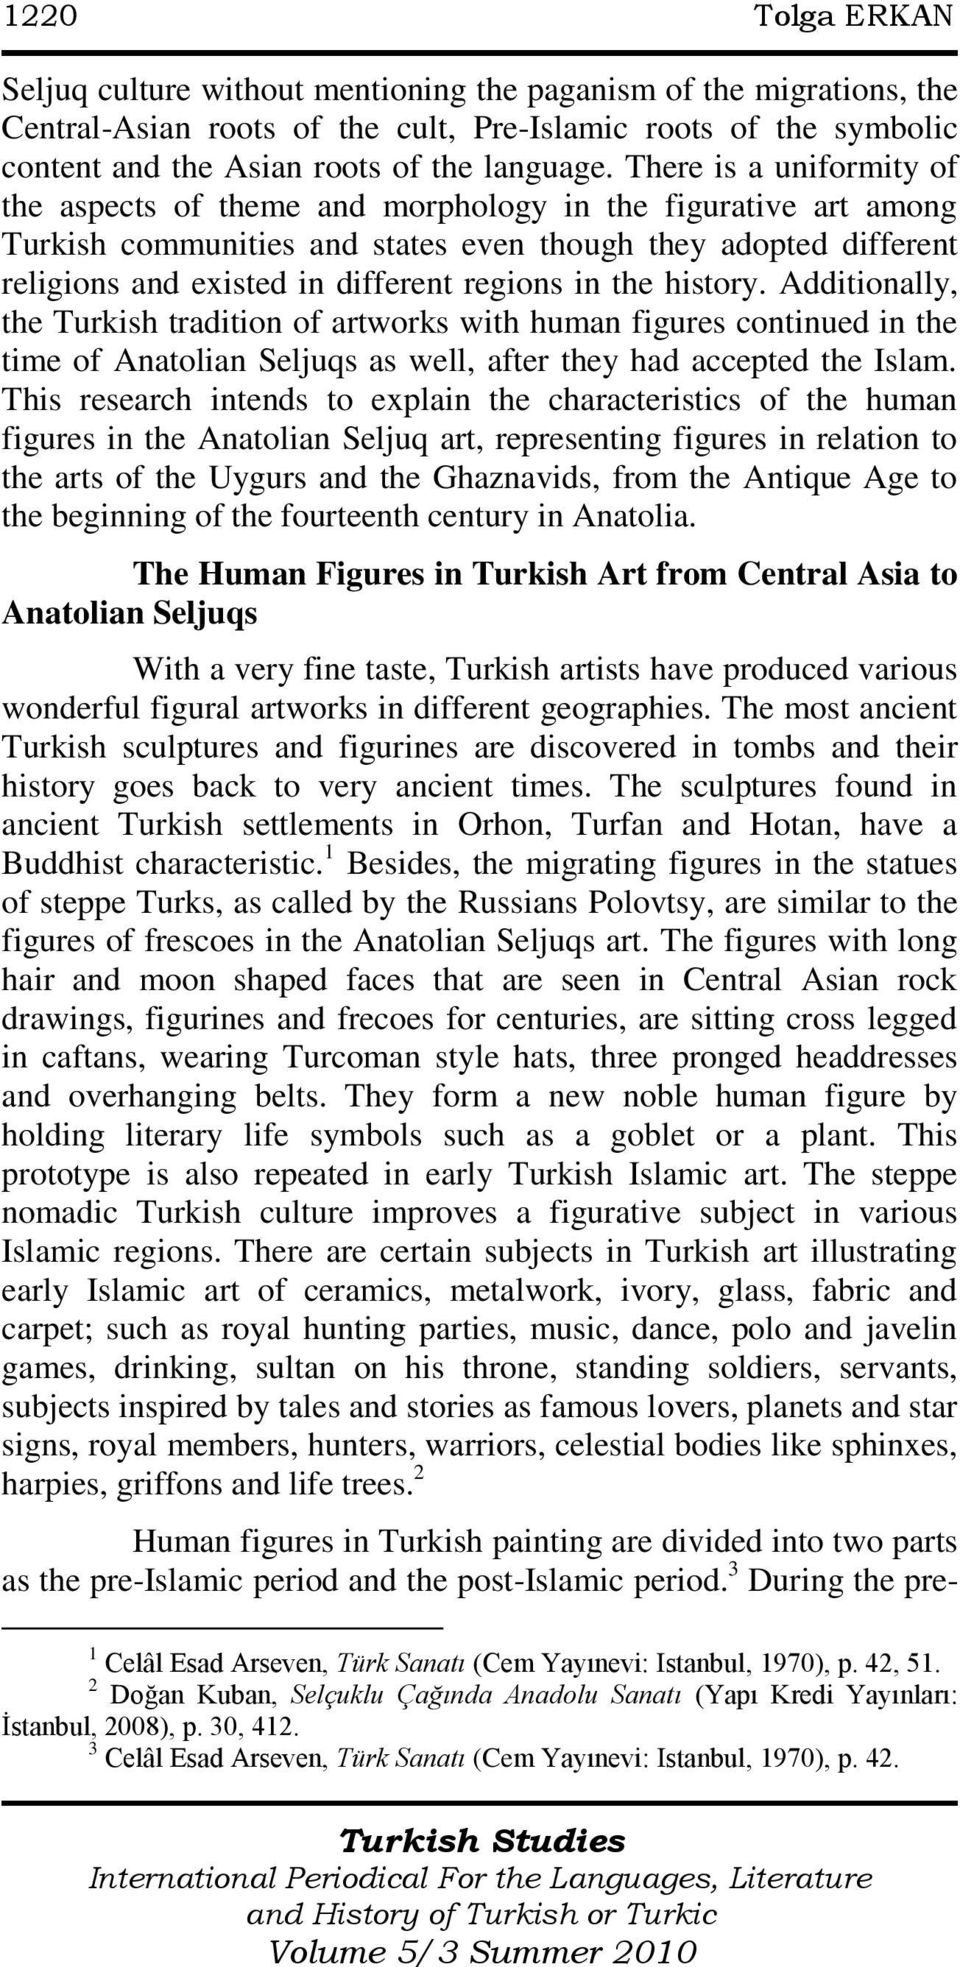 in the history. Additionally, the Turkish tradition of artworks with human figures continued in the time of Anatolian Seljuqs as well, after they had accepted the Islam.